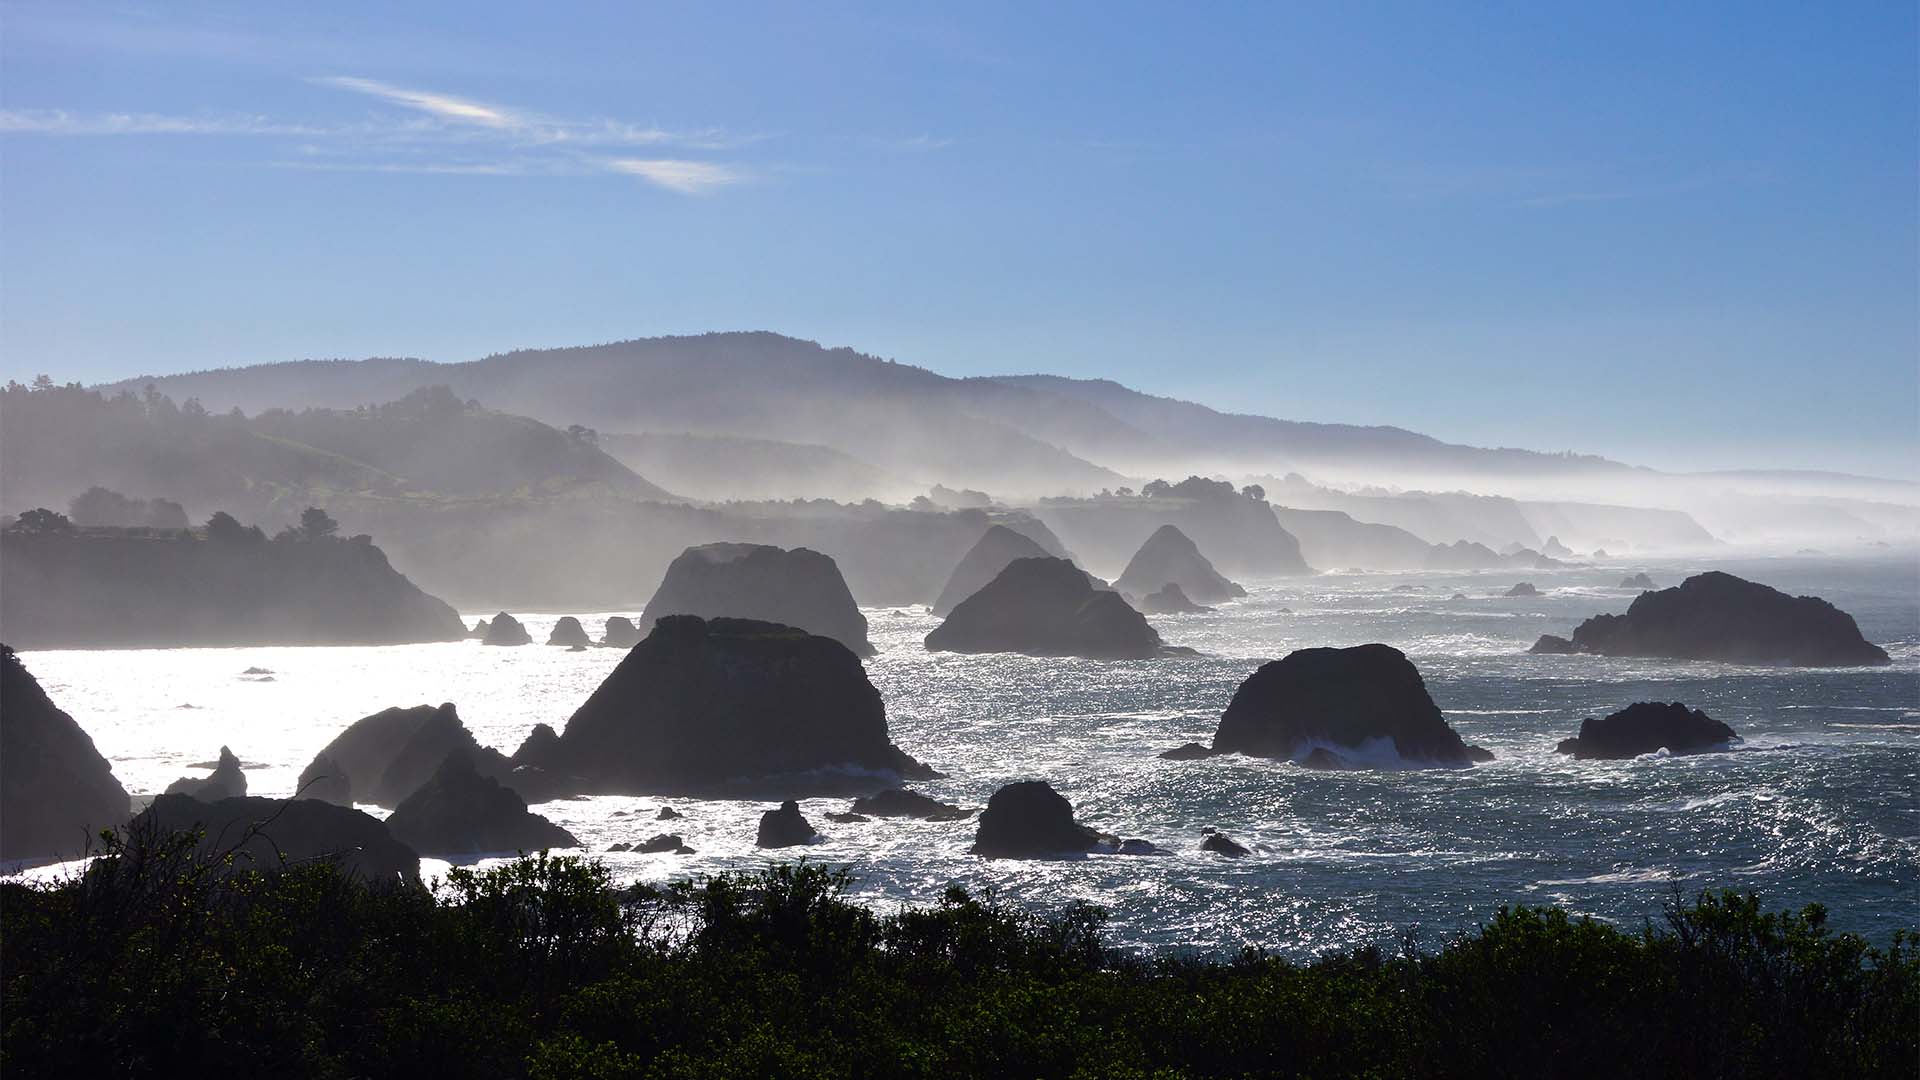 Scenic view of a Californian coast with dark bushes in the foreground, jagged rocks jutting out of the sea in the mid-ground, and a mountain range with a clear blue sky in the background. 